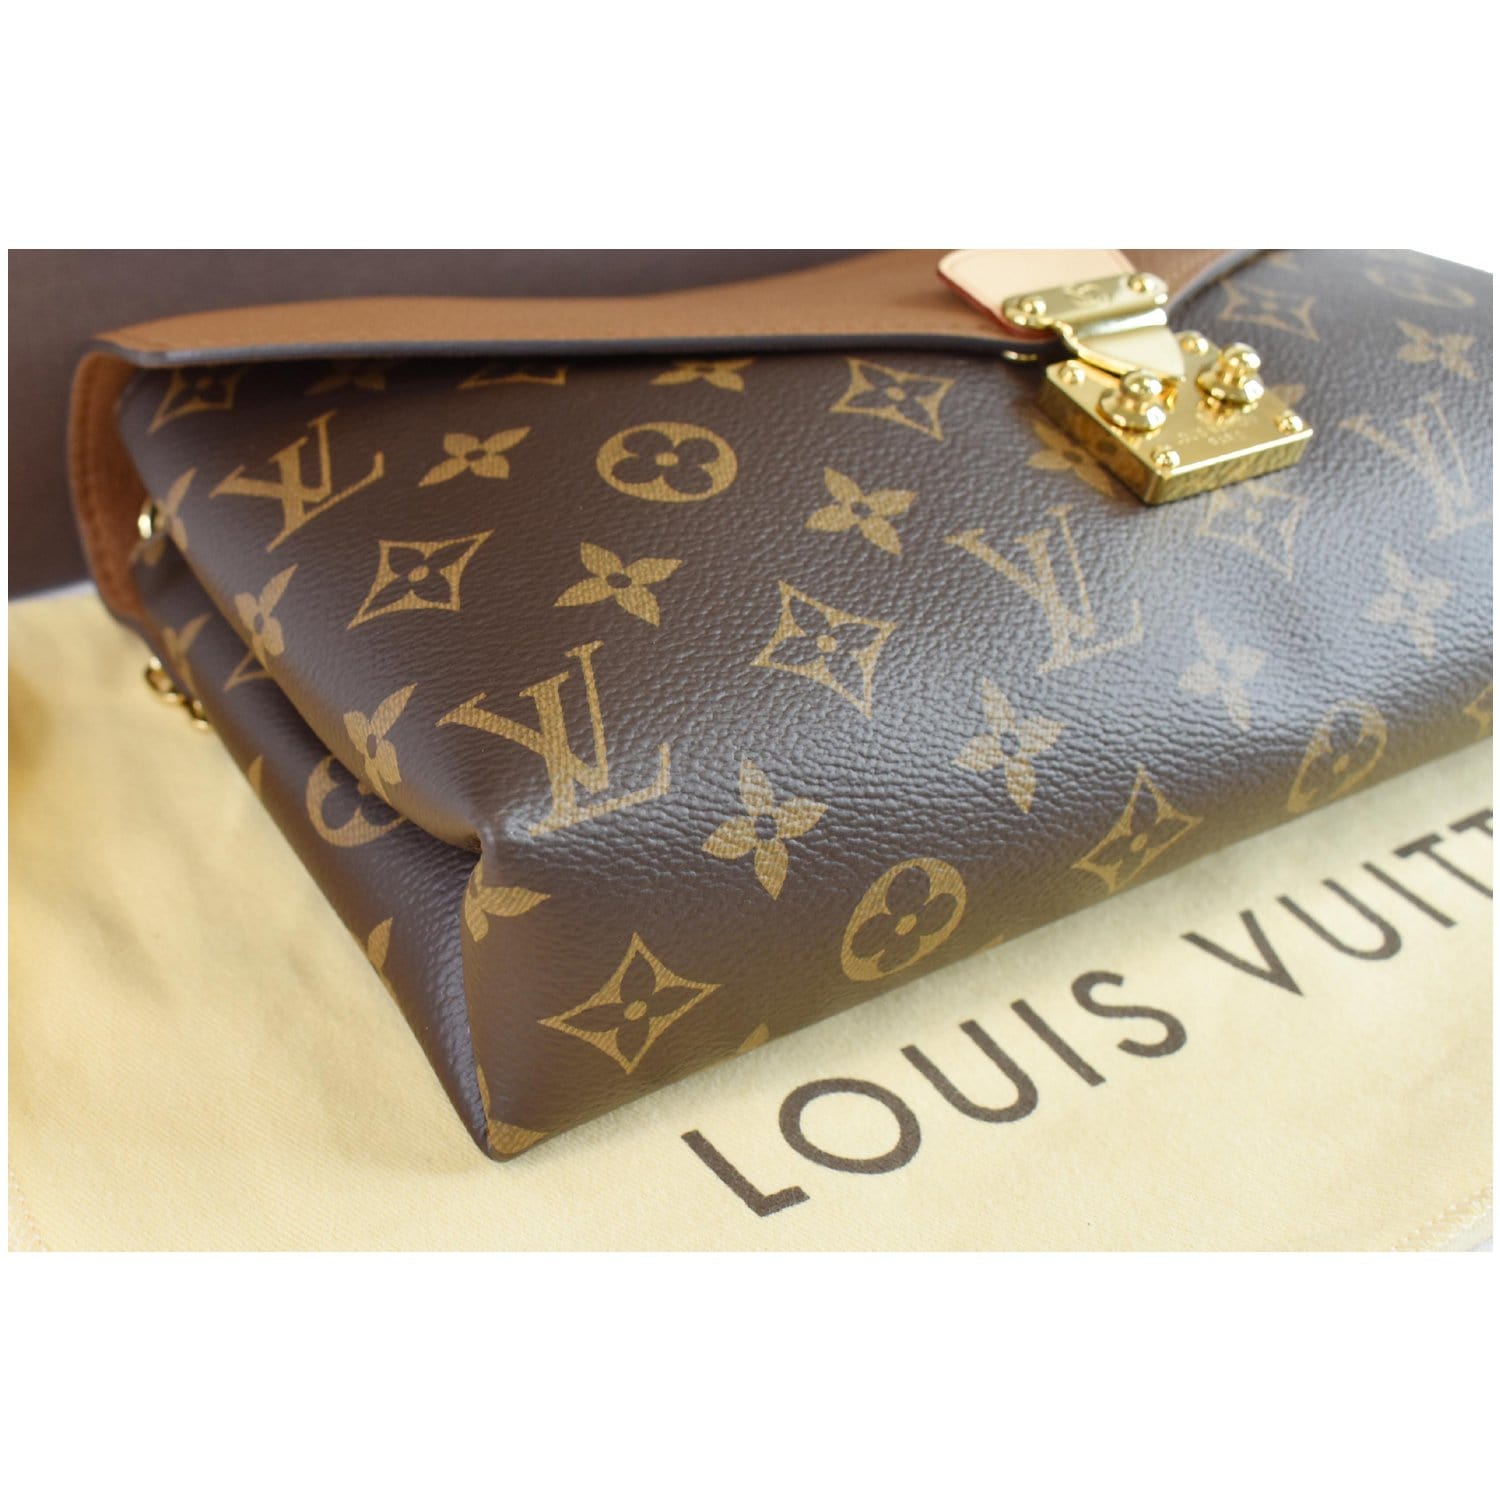 Gorgeous LV Pallas Chain link shoulder bag in Monogram canvas with red  calfskin leather. Est. Ret. $2200 GS $1299 DM us through FB or IG messenger  or, By The Golden Shoestring